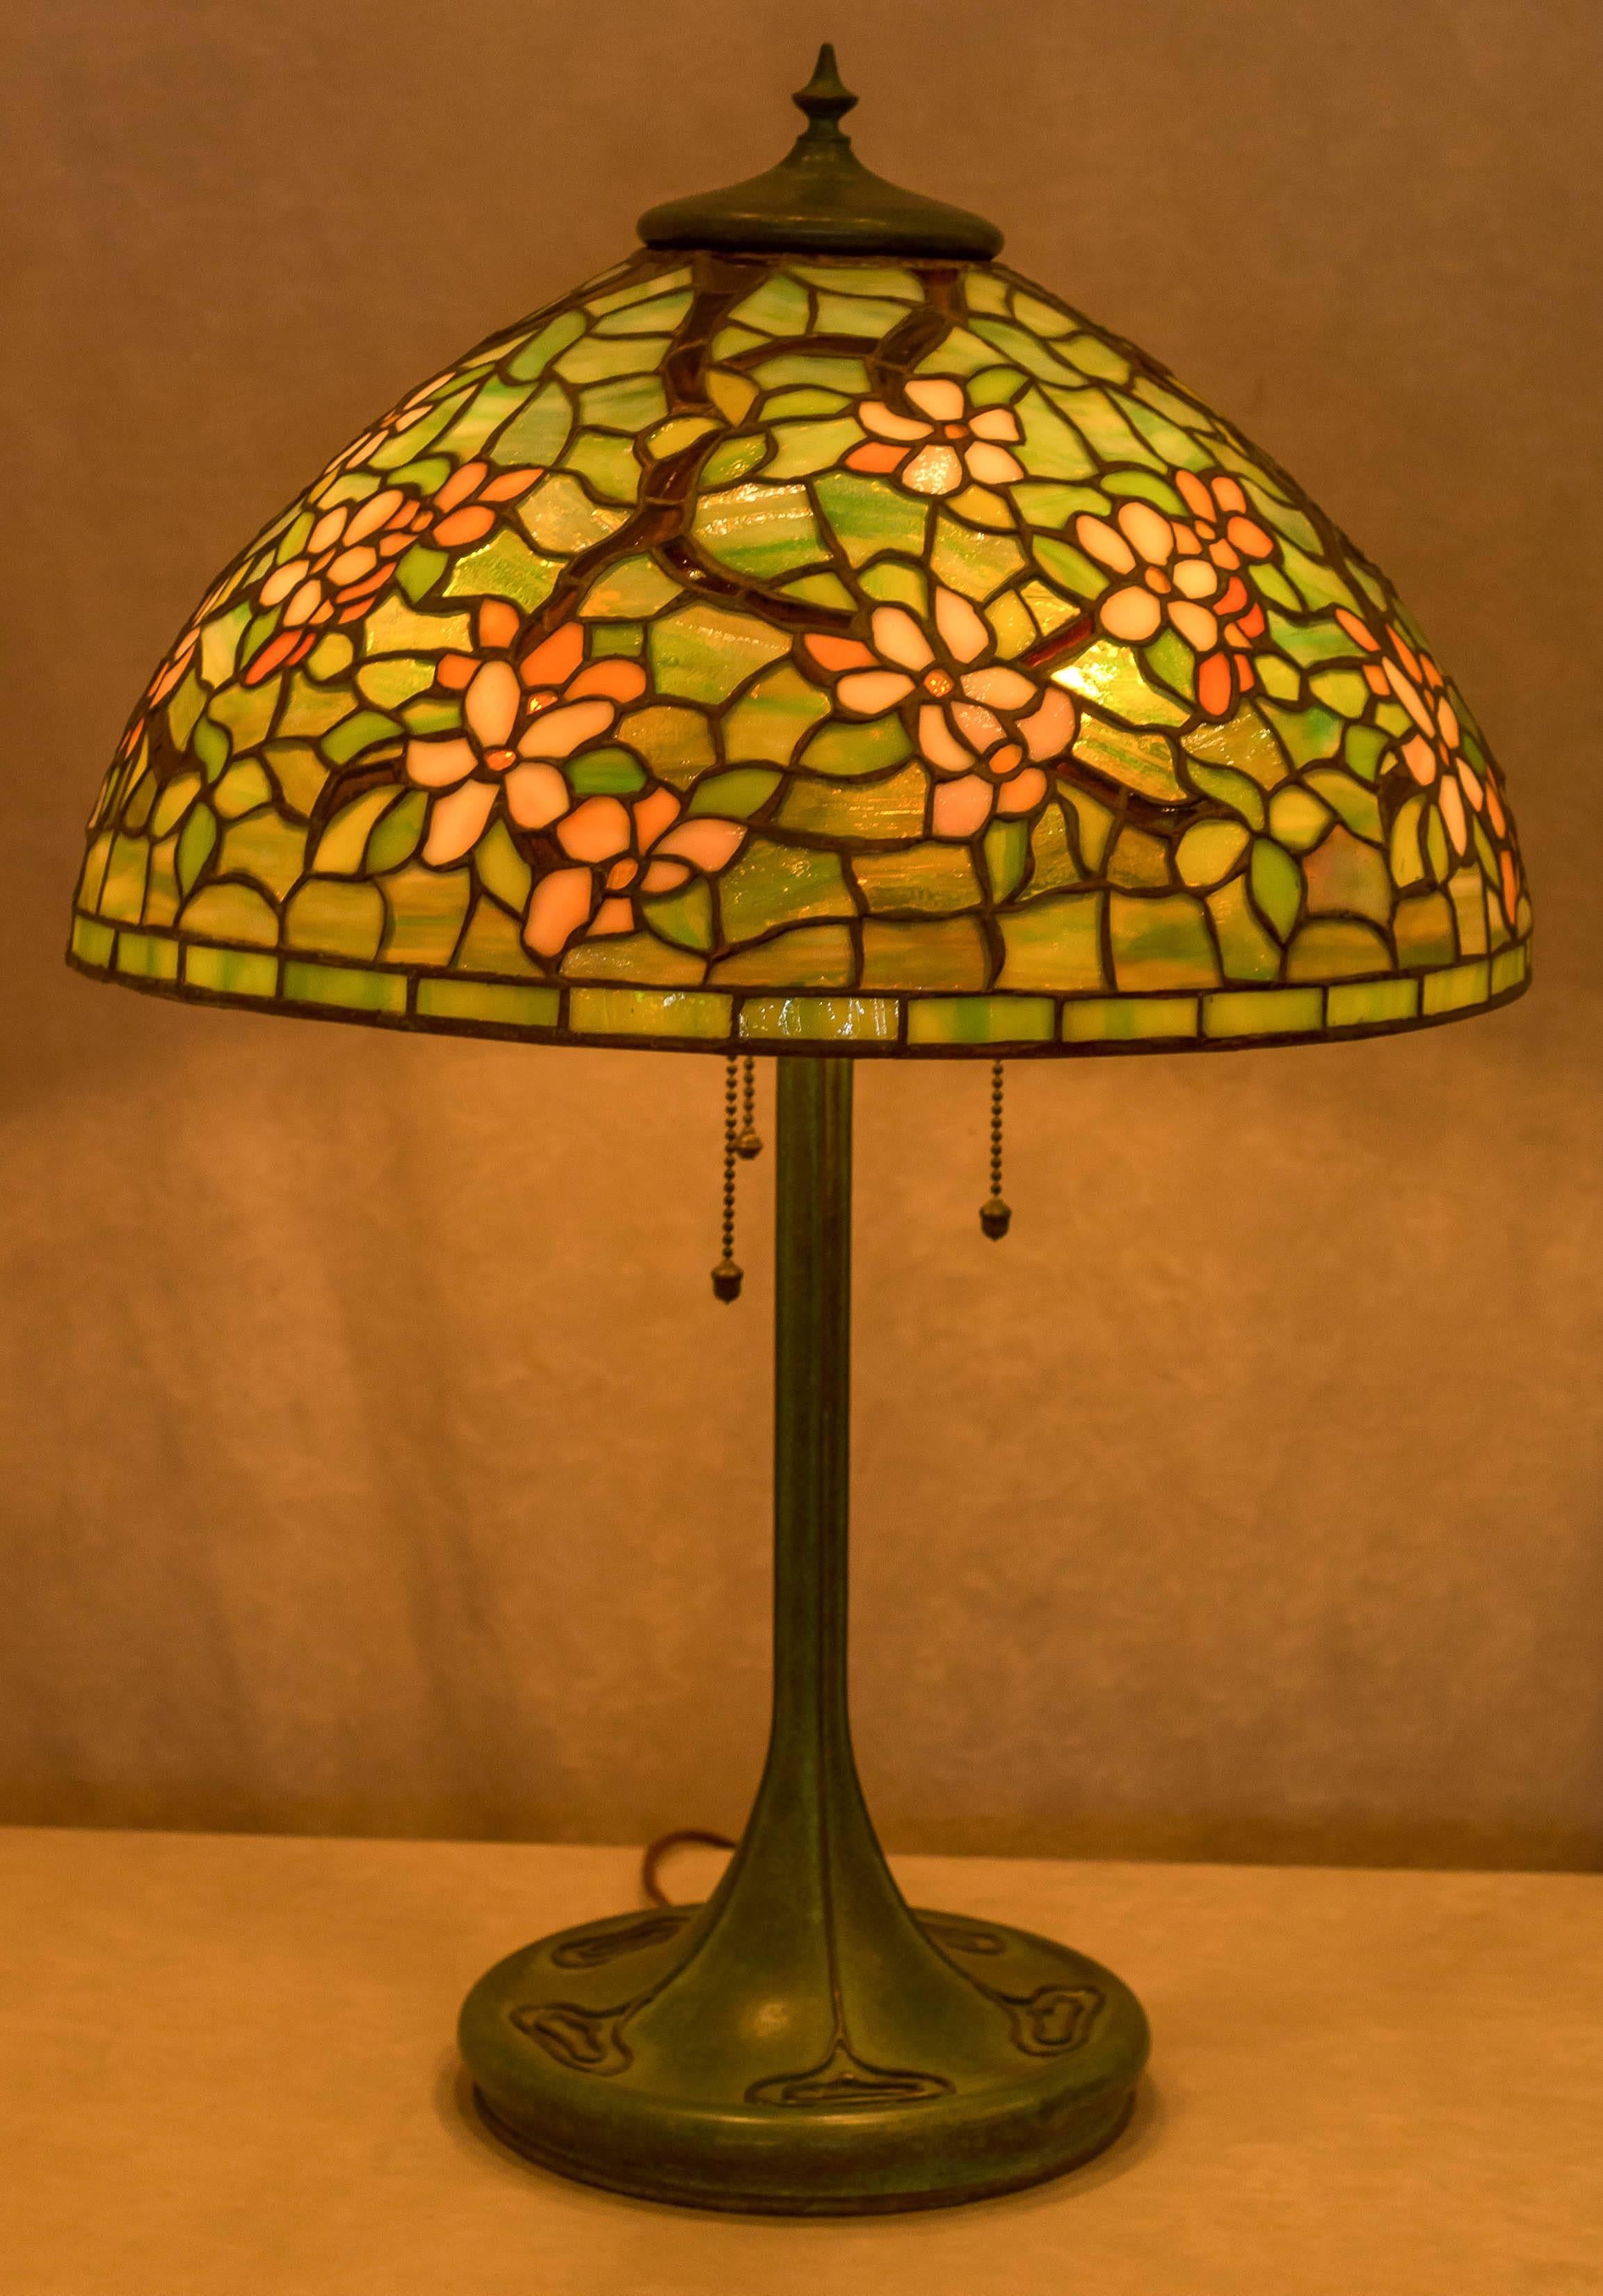 This very colorful and well designed leaded glass lamp was done by The Unique Art Glass Company, which made some of the finest leaded glass lighting and was the first to follow Tiffany. The spun bronze base is highlighted by their beautiful